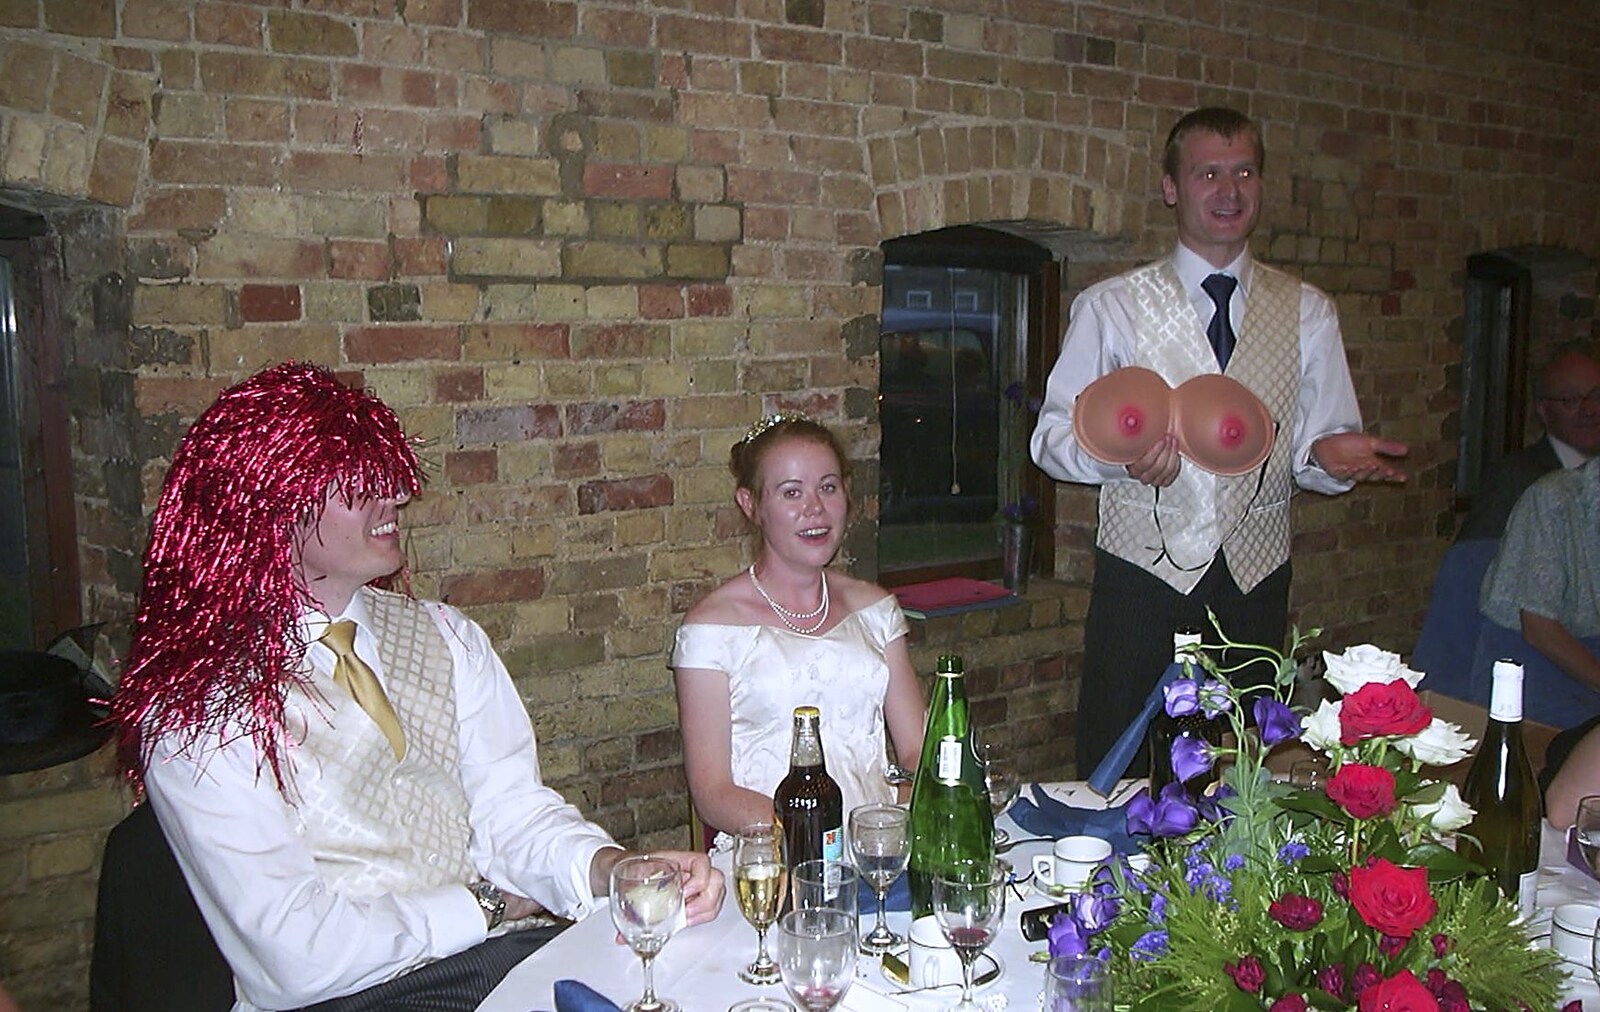 Stef and Kath's 3G Lab Wedding, Ely, Cambridgeshire - 28th July 2001: Stef's got a wig, and the best man has some boobs